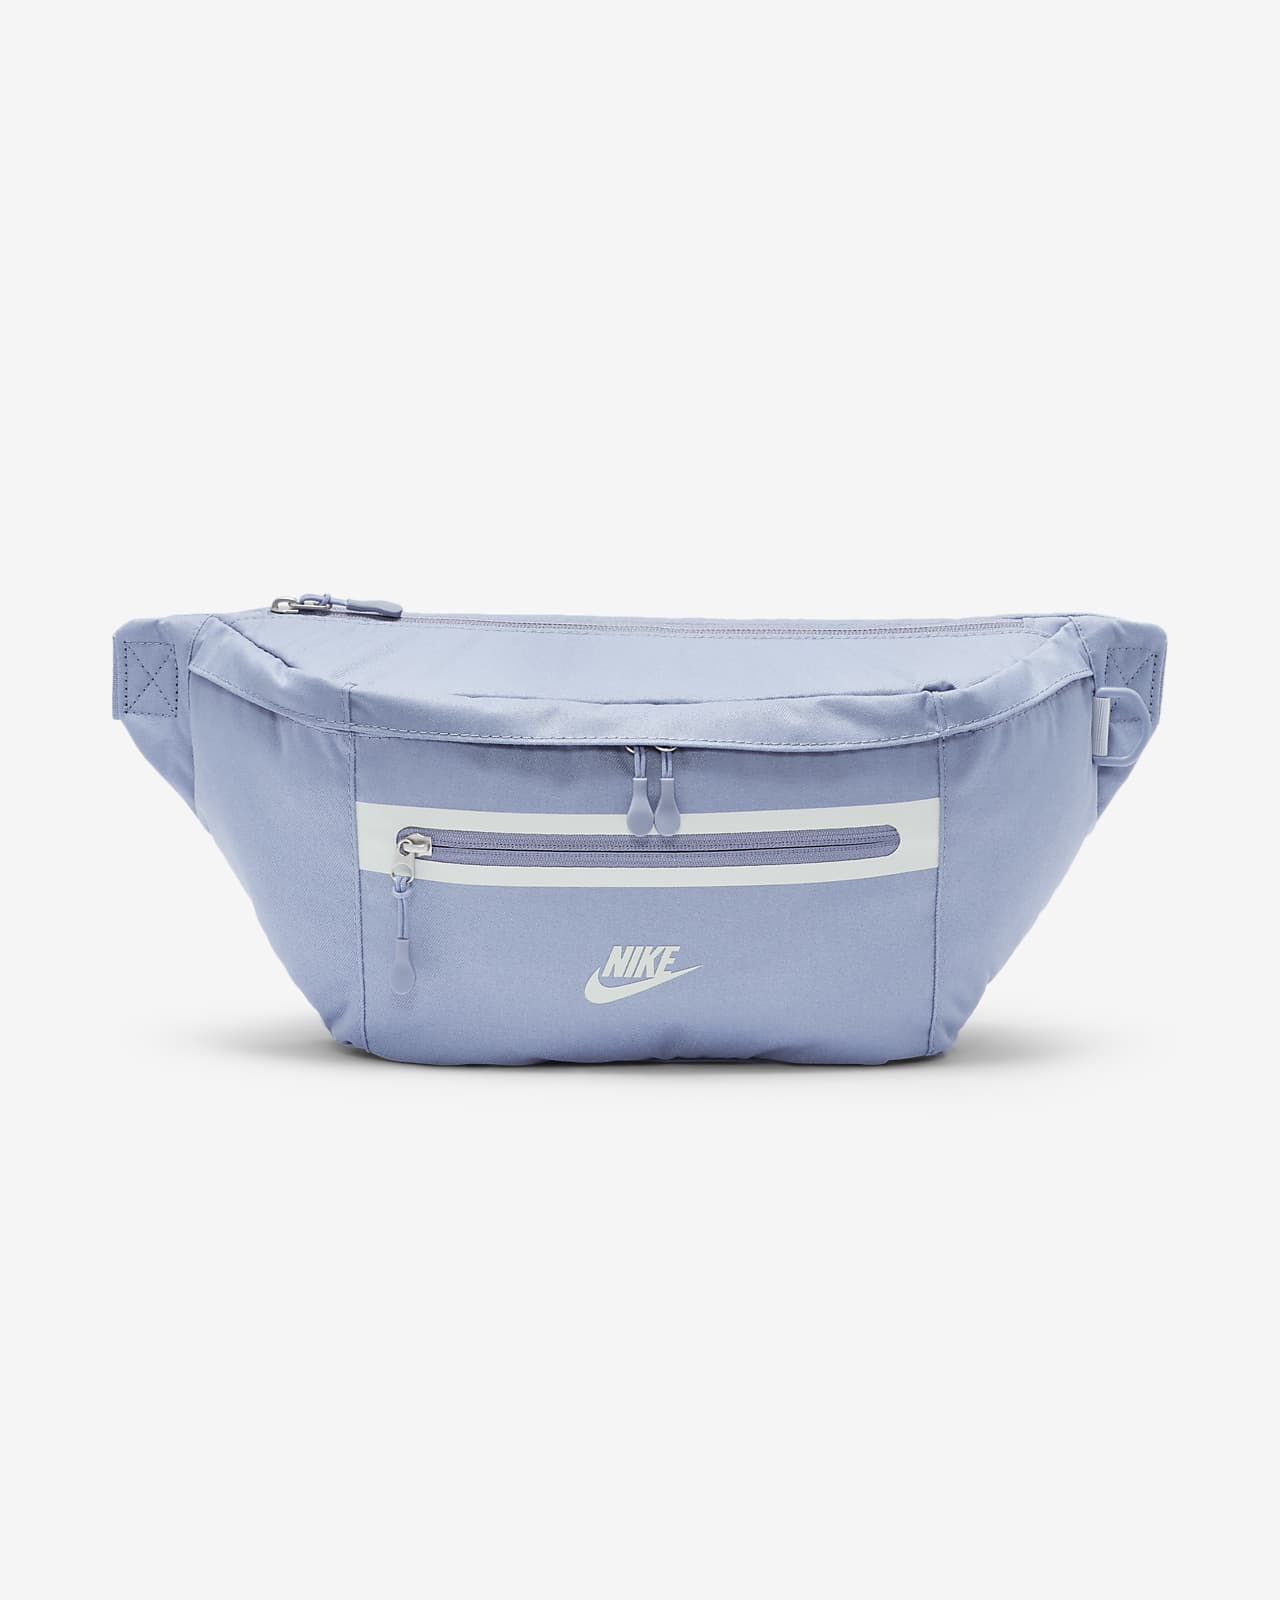 Sac à chaussures Nike (petite taille, 8 L). Nike FR